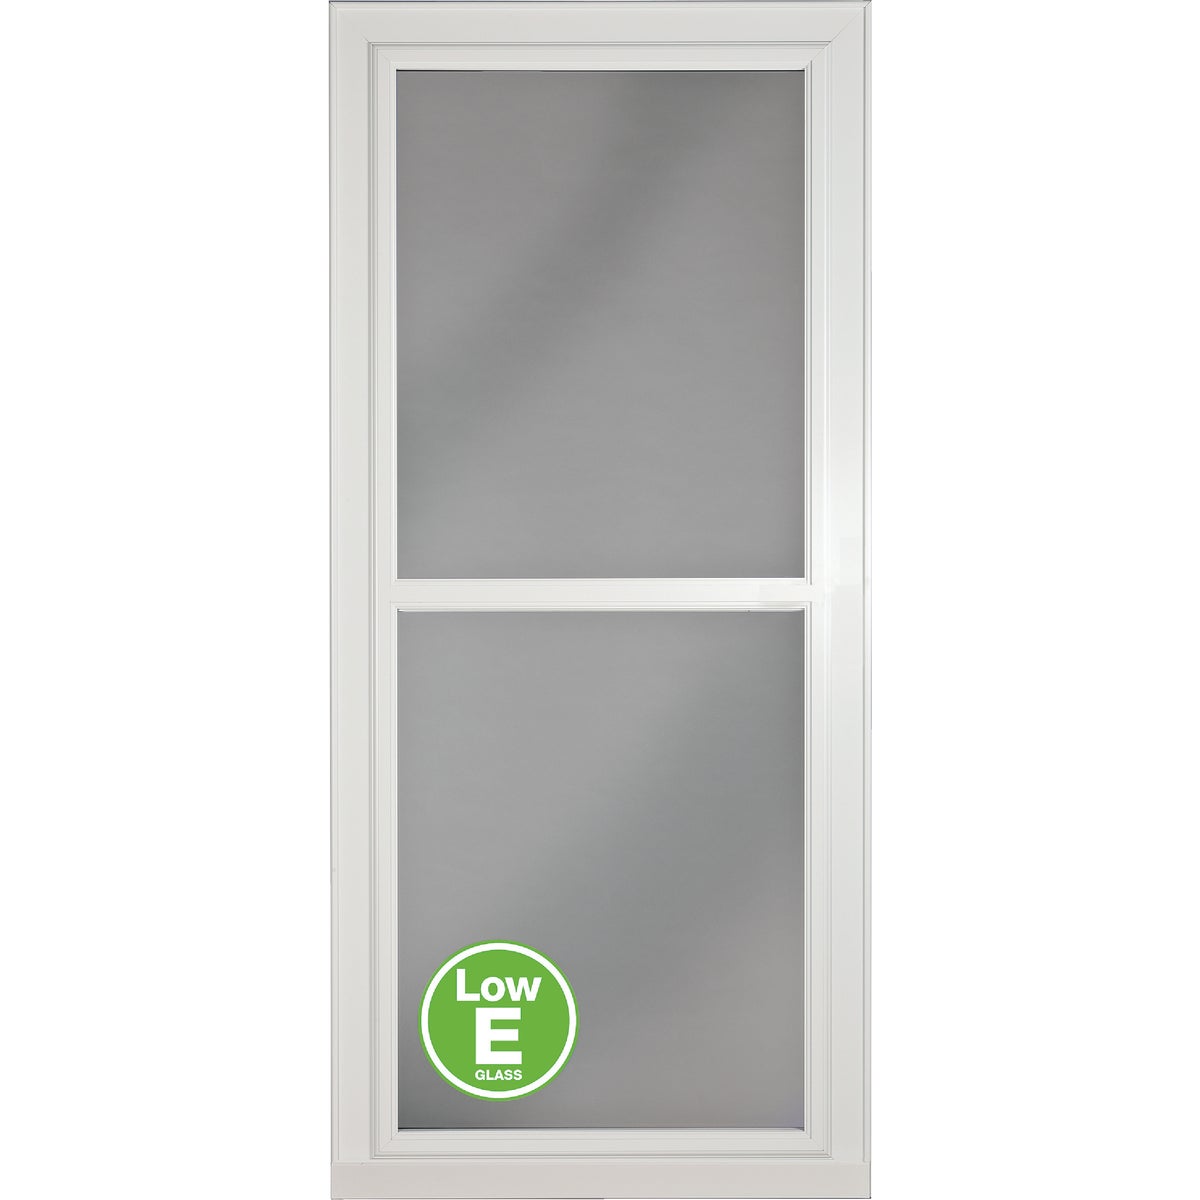 Larson Easy Vent 146 Series 36 In. W x 81 In. H x 1-7/8 In. Thick White Full View Aluminum Storm Door